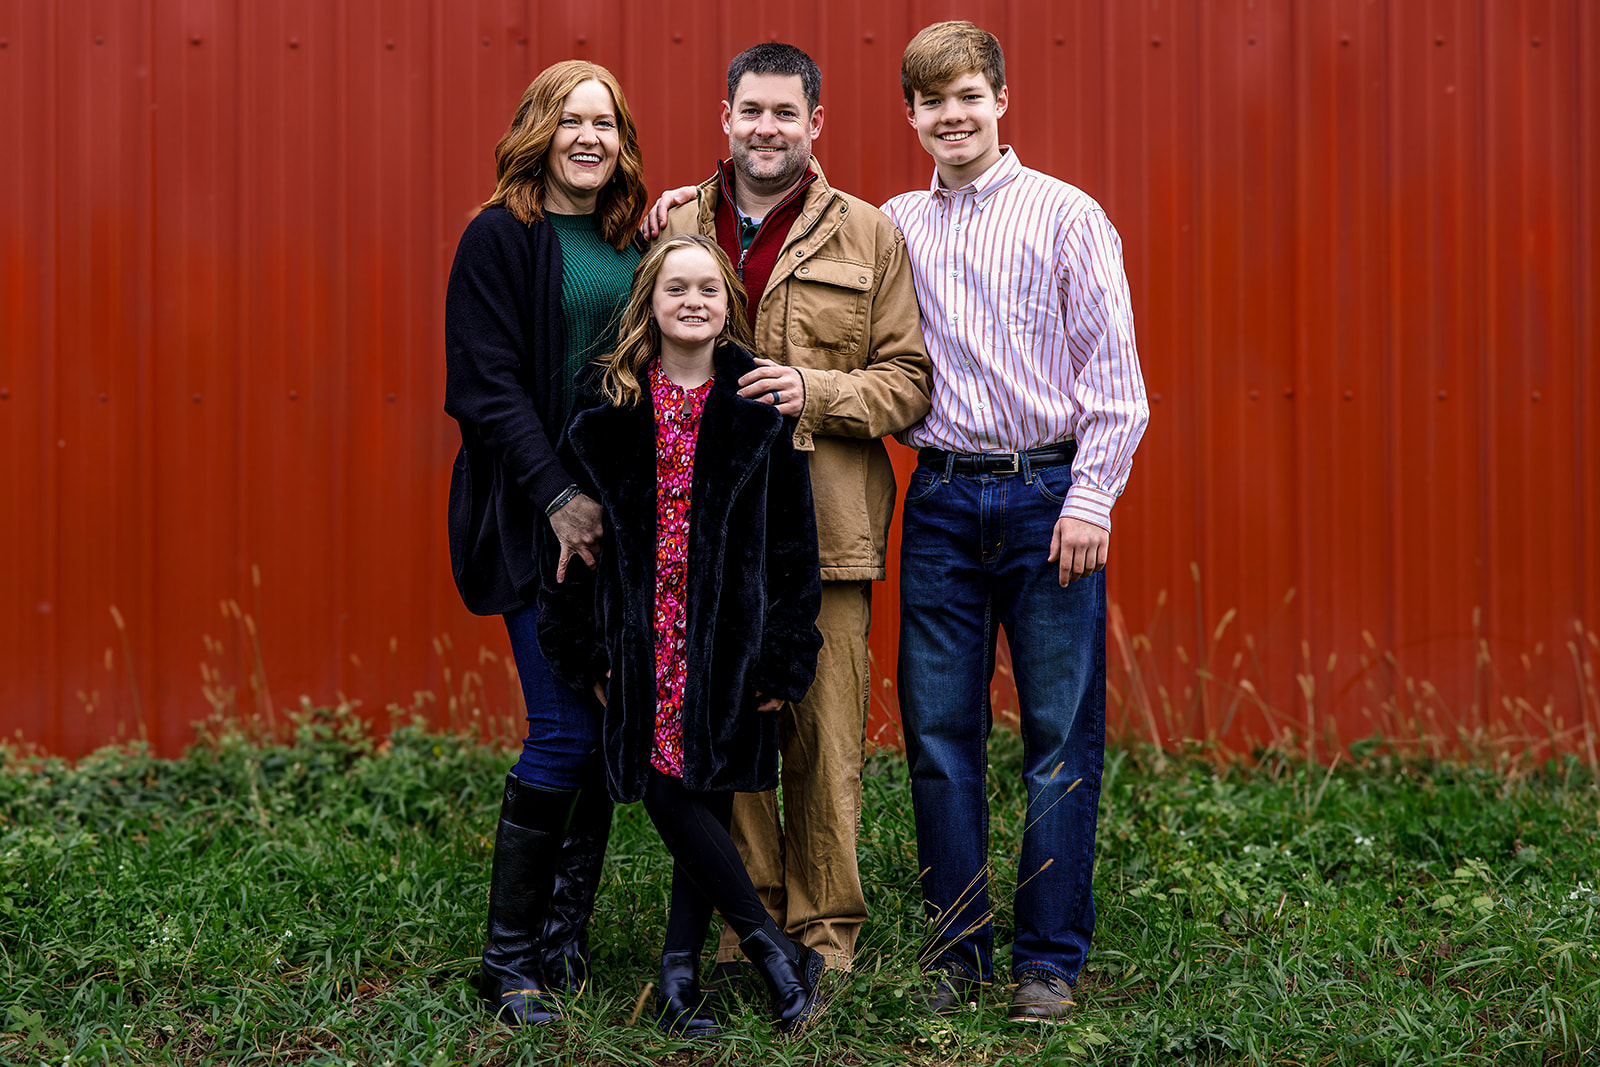 Autumnal Elegance in West Salem, WI: Family Portraits by Jeff Wiswell of J.L. Wiswell Photography of Onalaska, WI